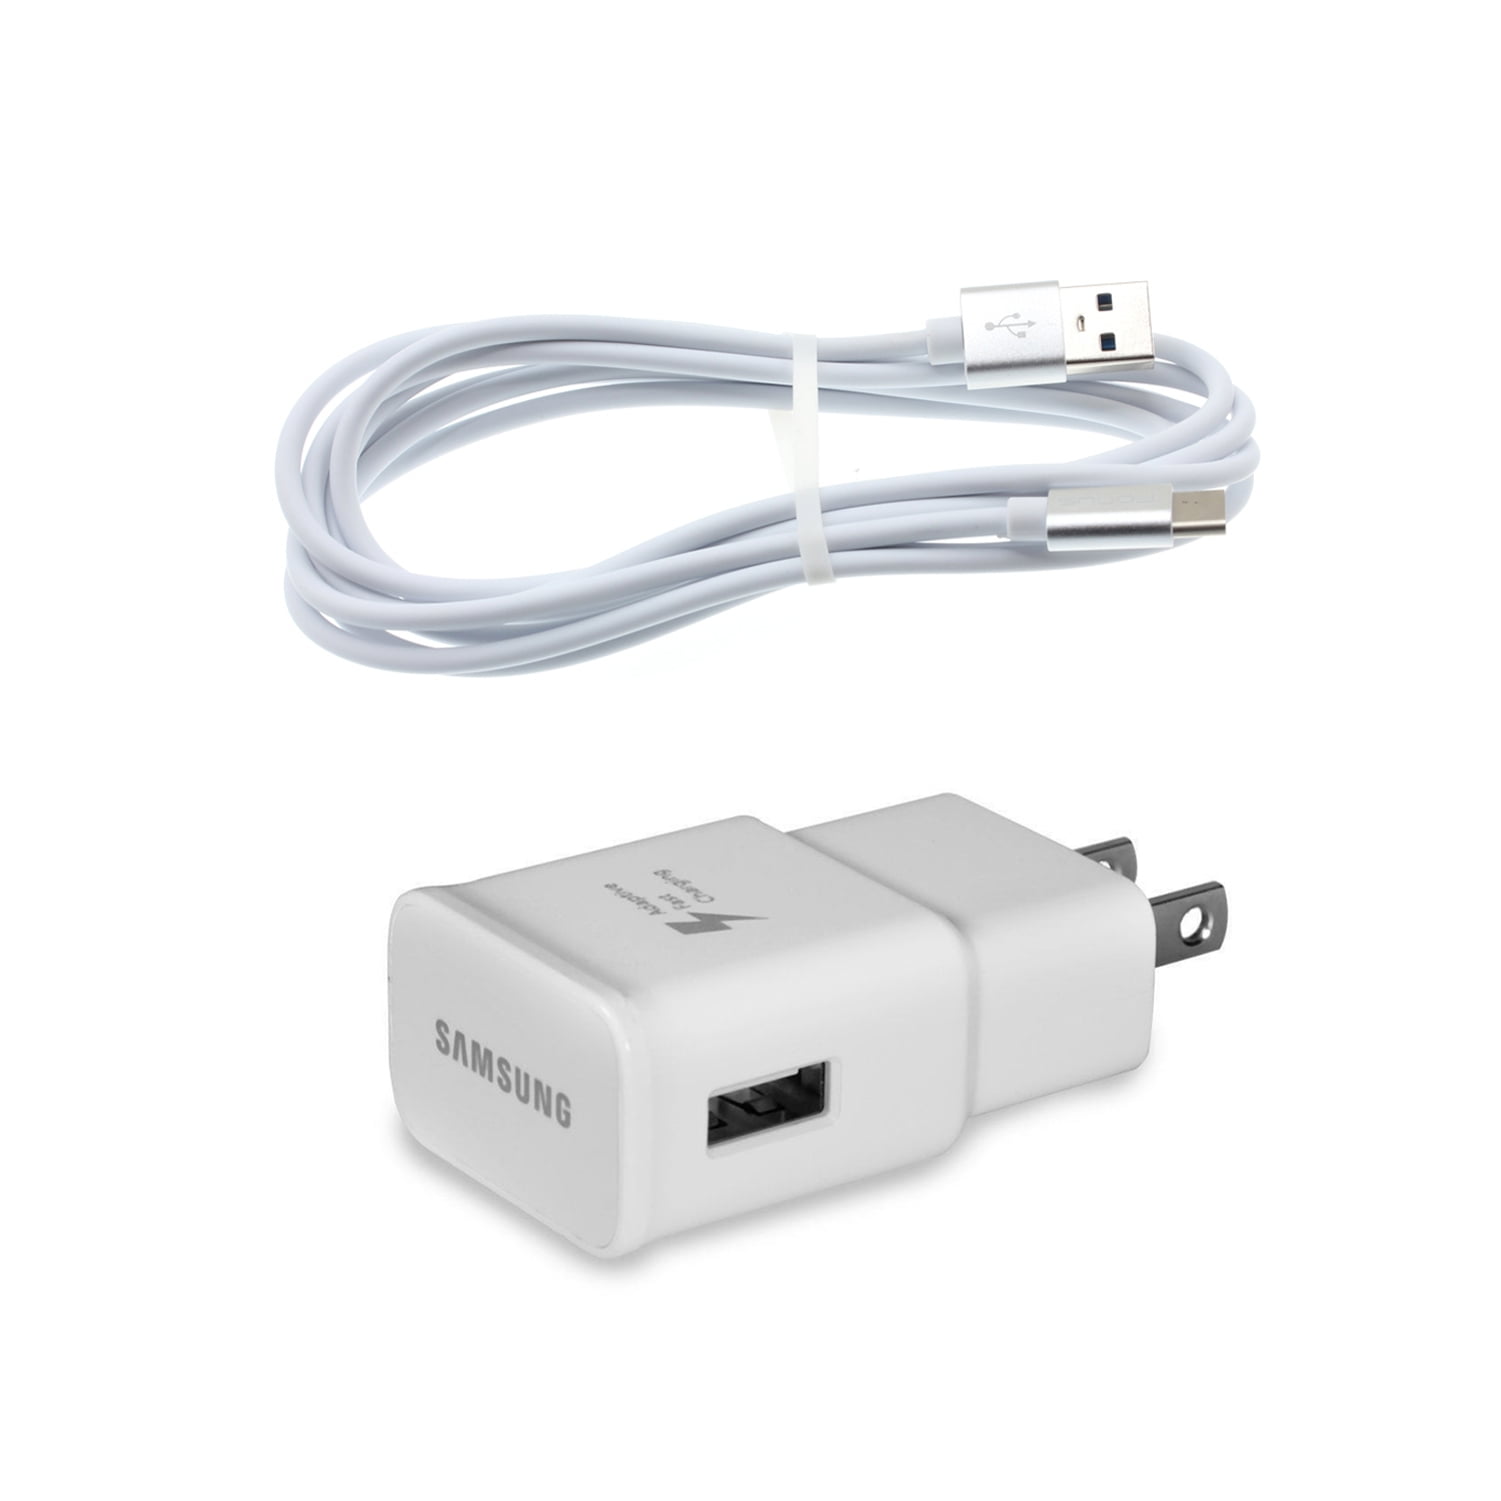 Type-C Fast Home Charger for Galaxy Tab A 10.1 (2019) - 6ft USB Cable Quick Power Adapter Travel N1Z for Galaxy Tab A 10.1 (2019 Model - Walmart.com